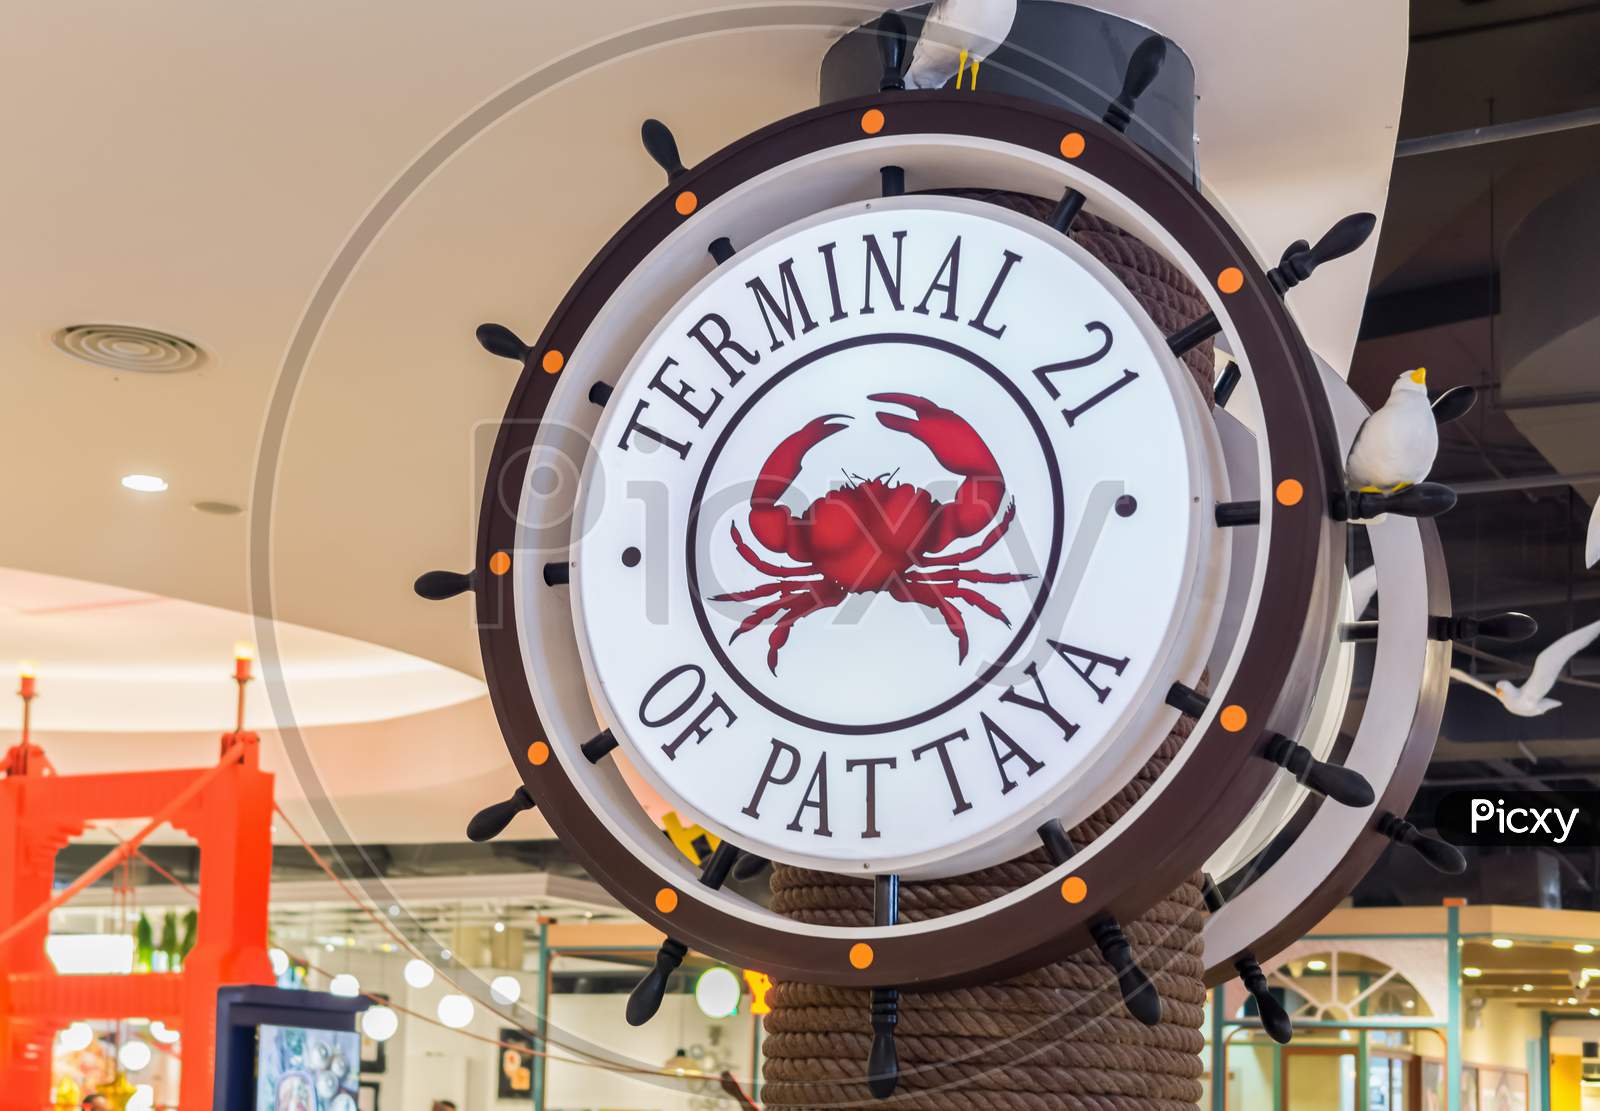 Pattaya,Thailand - October 19,2018:Terminal 21 This Is The Sign Of The Shopping Mall.Inside The Building Are Many Shops,Restaurants,A Supermarket And A Cinema.